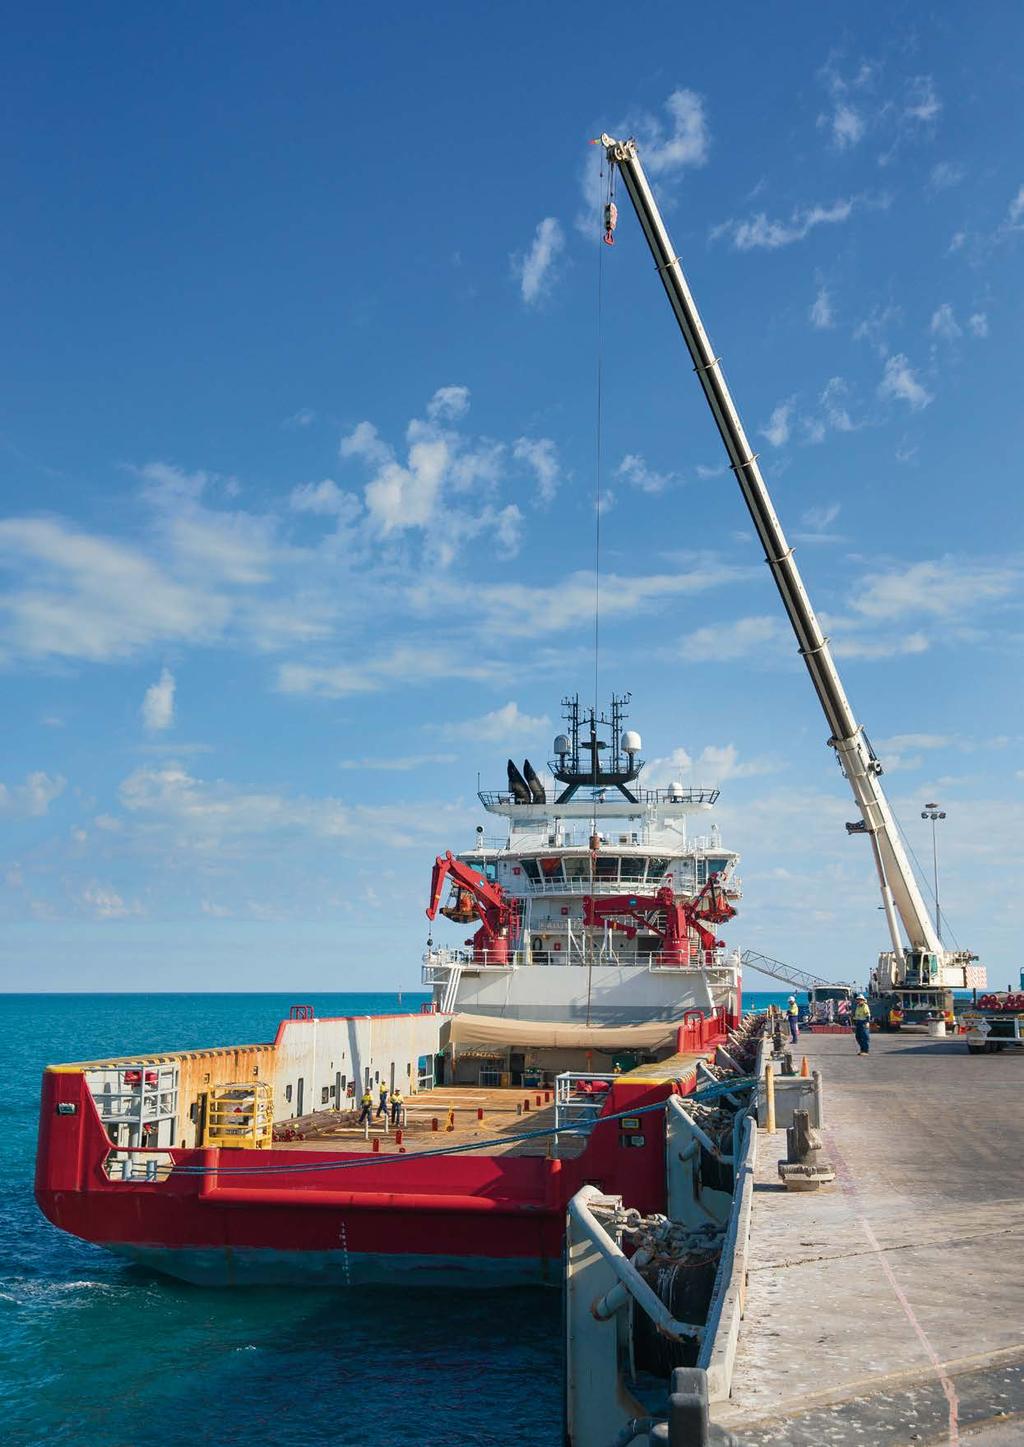 Offshore construction and development drilling The Ichthys LNG Project is expected to produce up to 8.9 million tonnes per annum of liquefied natural gas and 1.